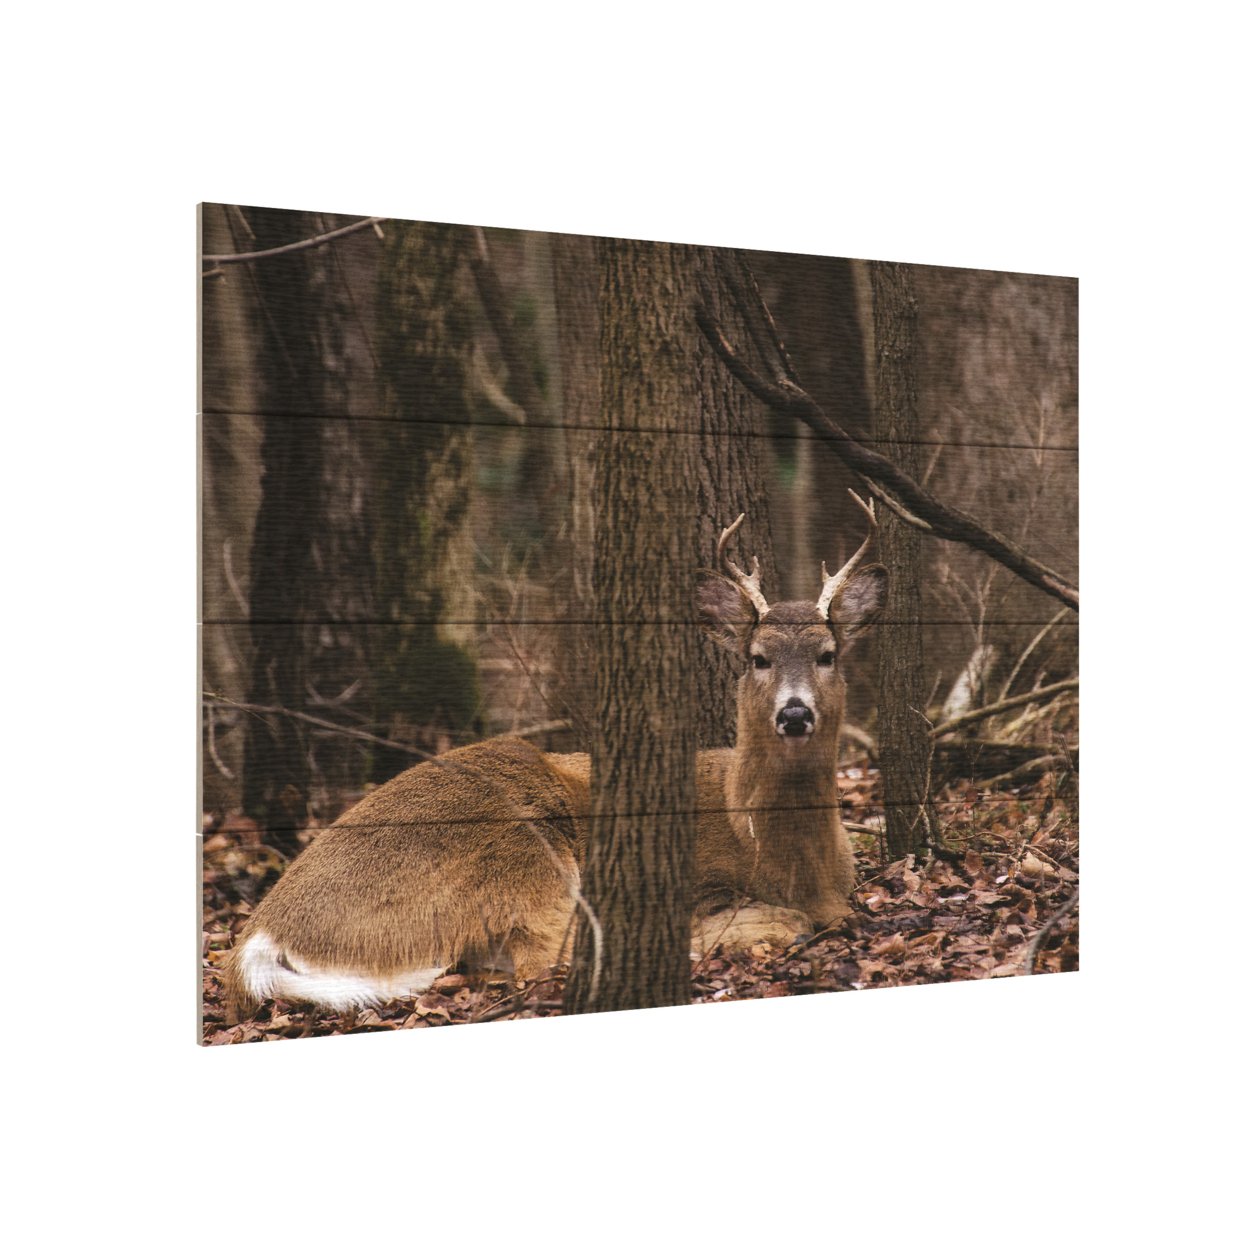 Wall Art 12 X 16 Inches Titled Sitting Deer/Lake Isaac Ready To Hang Printed On Wooden Planks